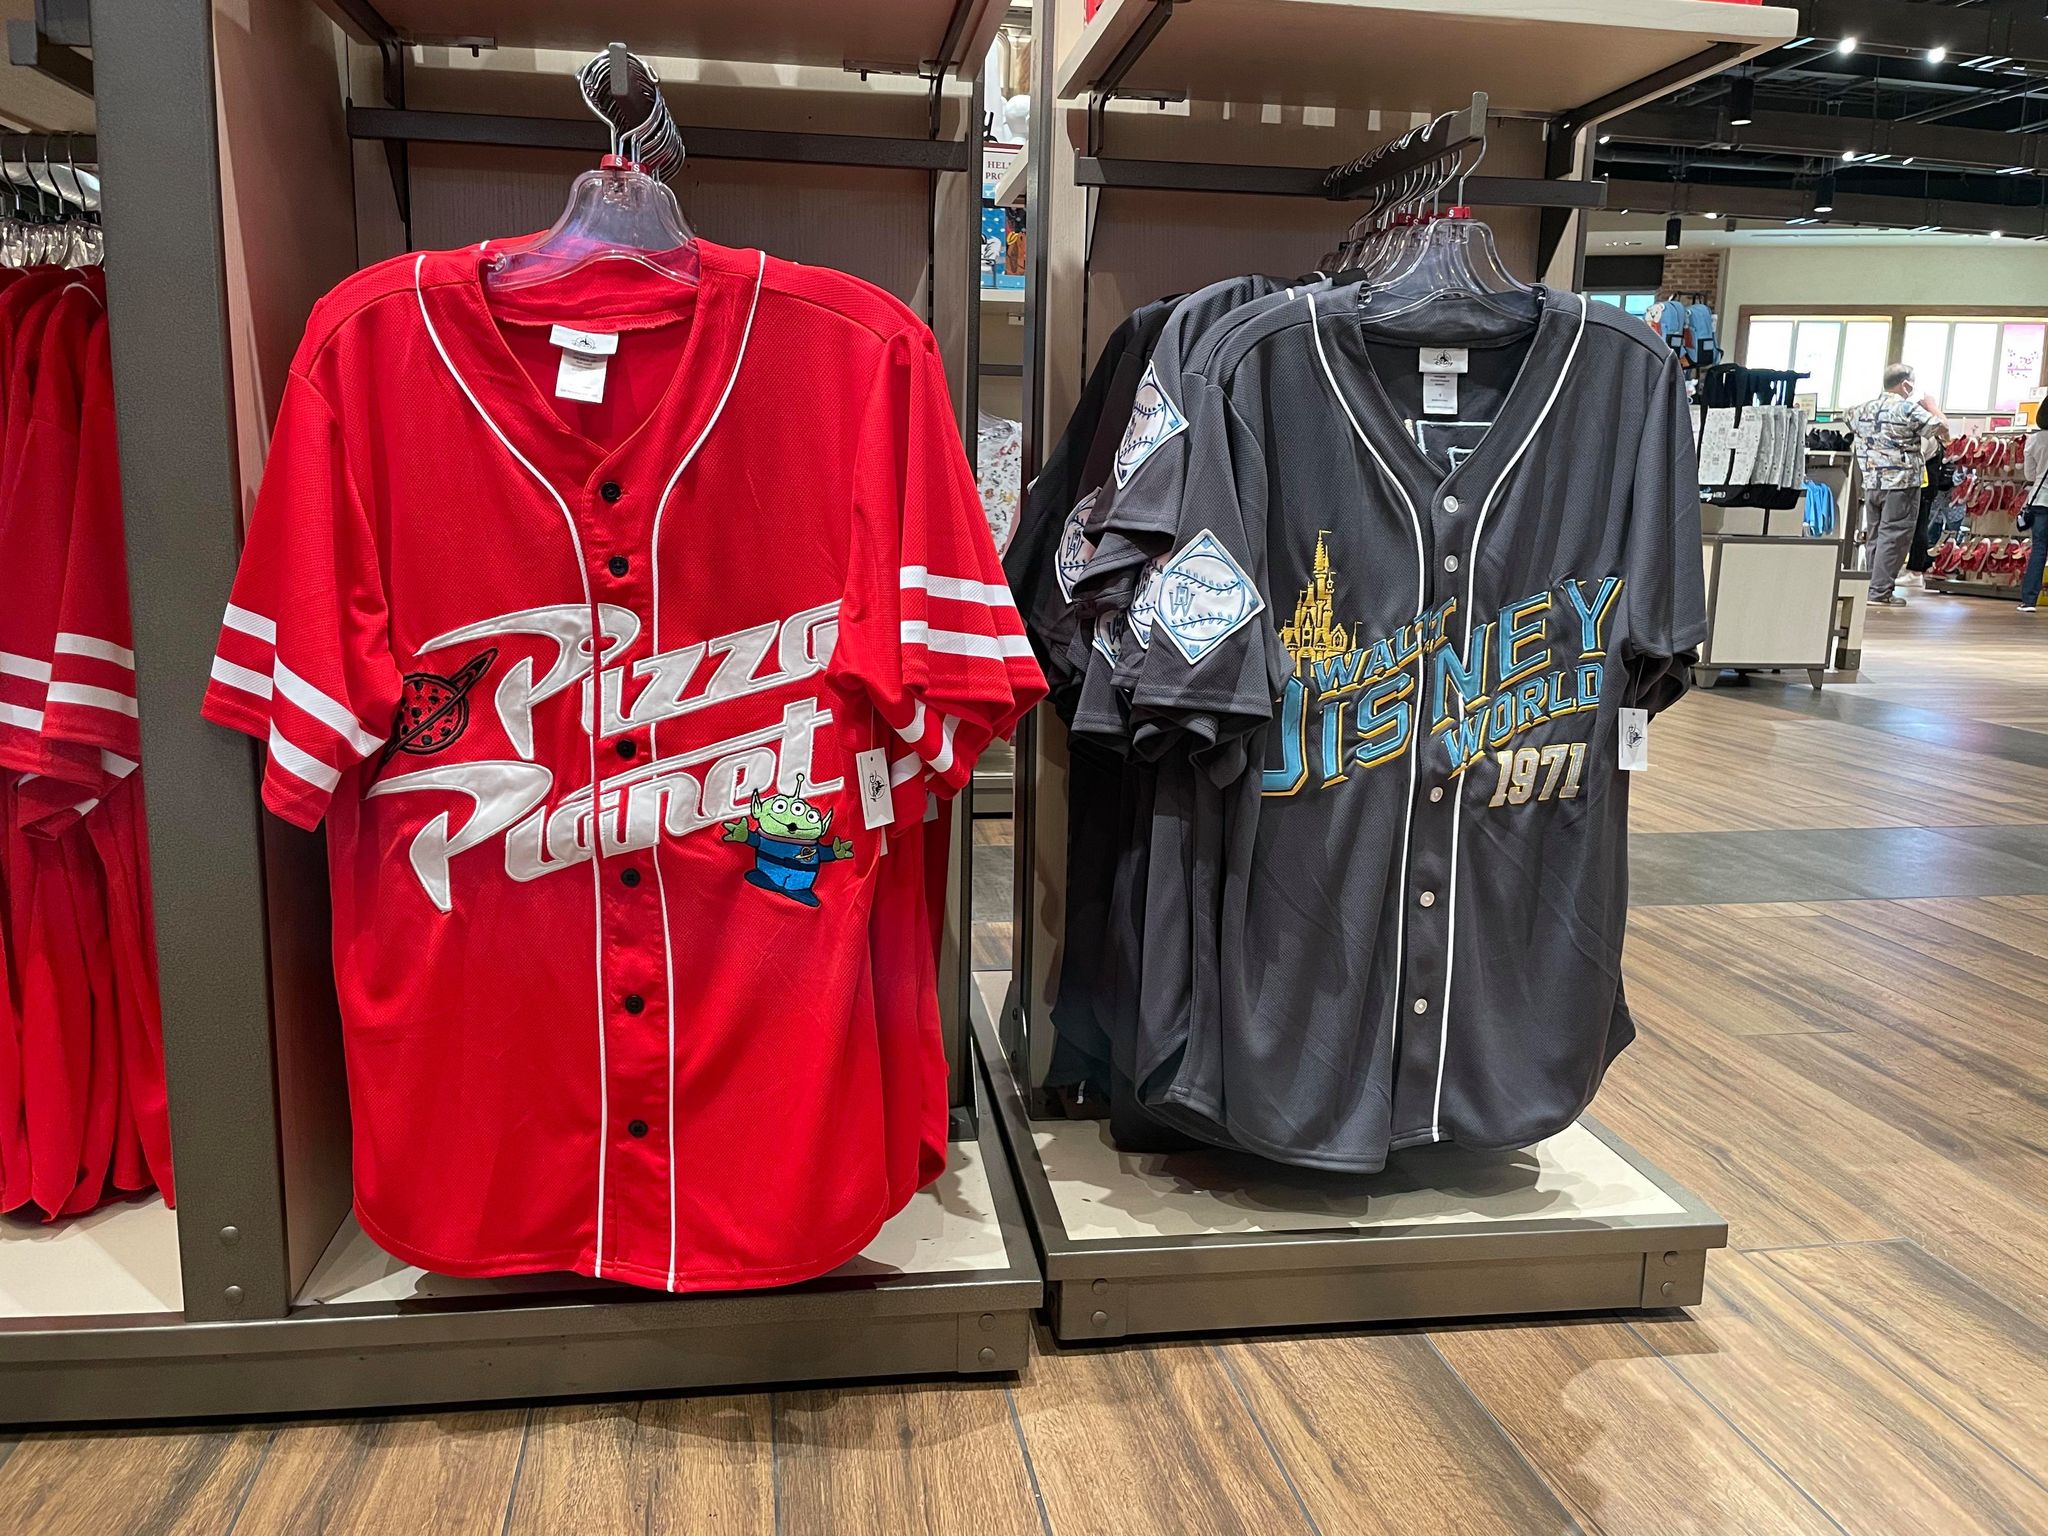 Check Out The Awesome Baseball Jerseys Now Available at Disney